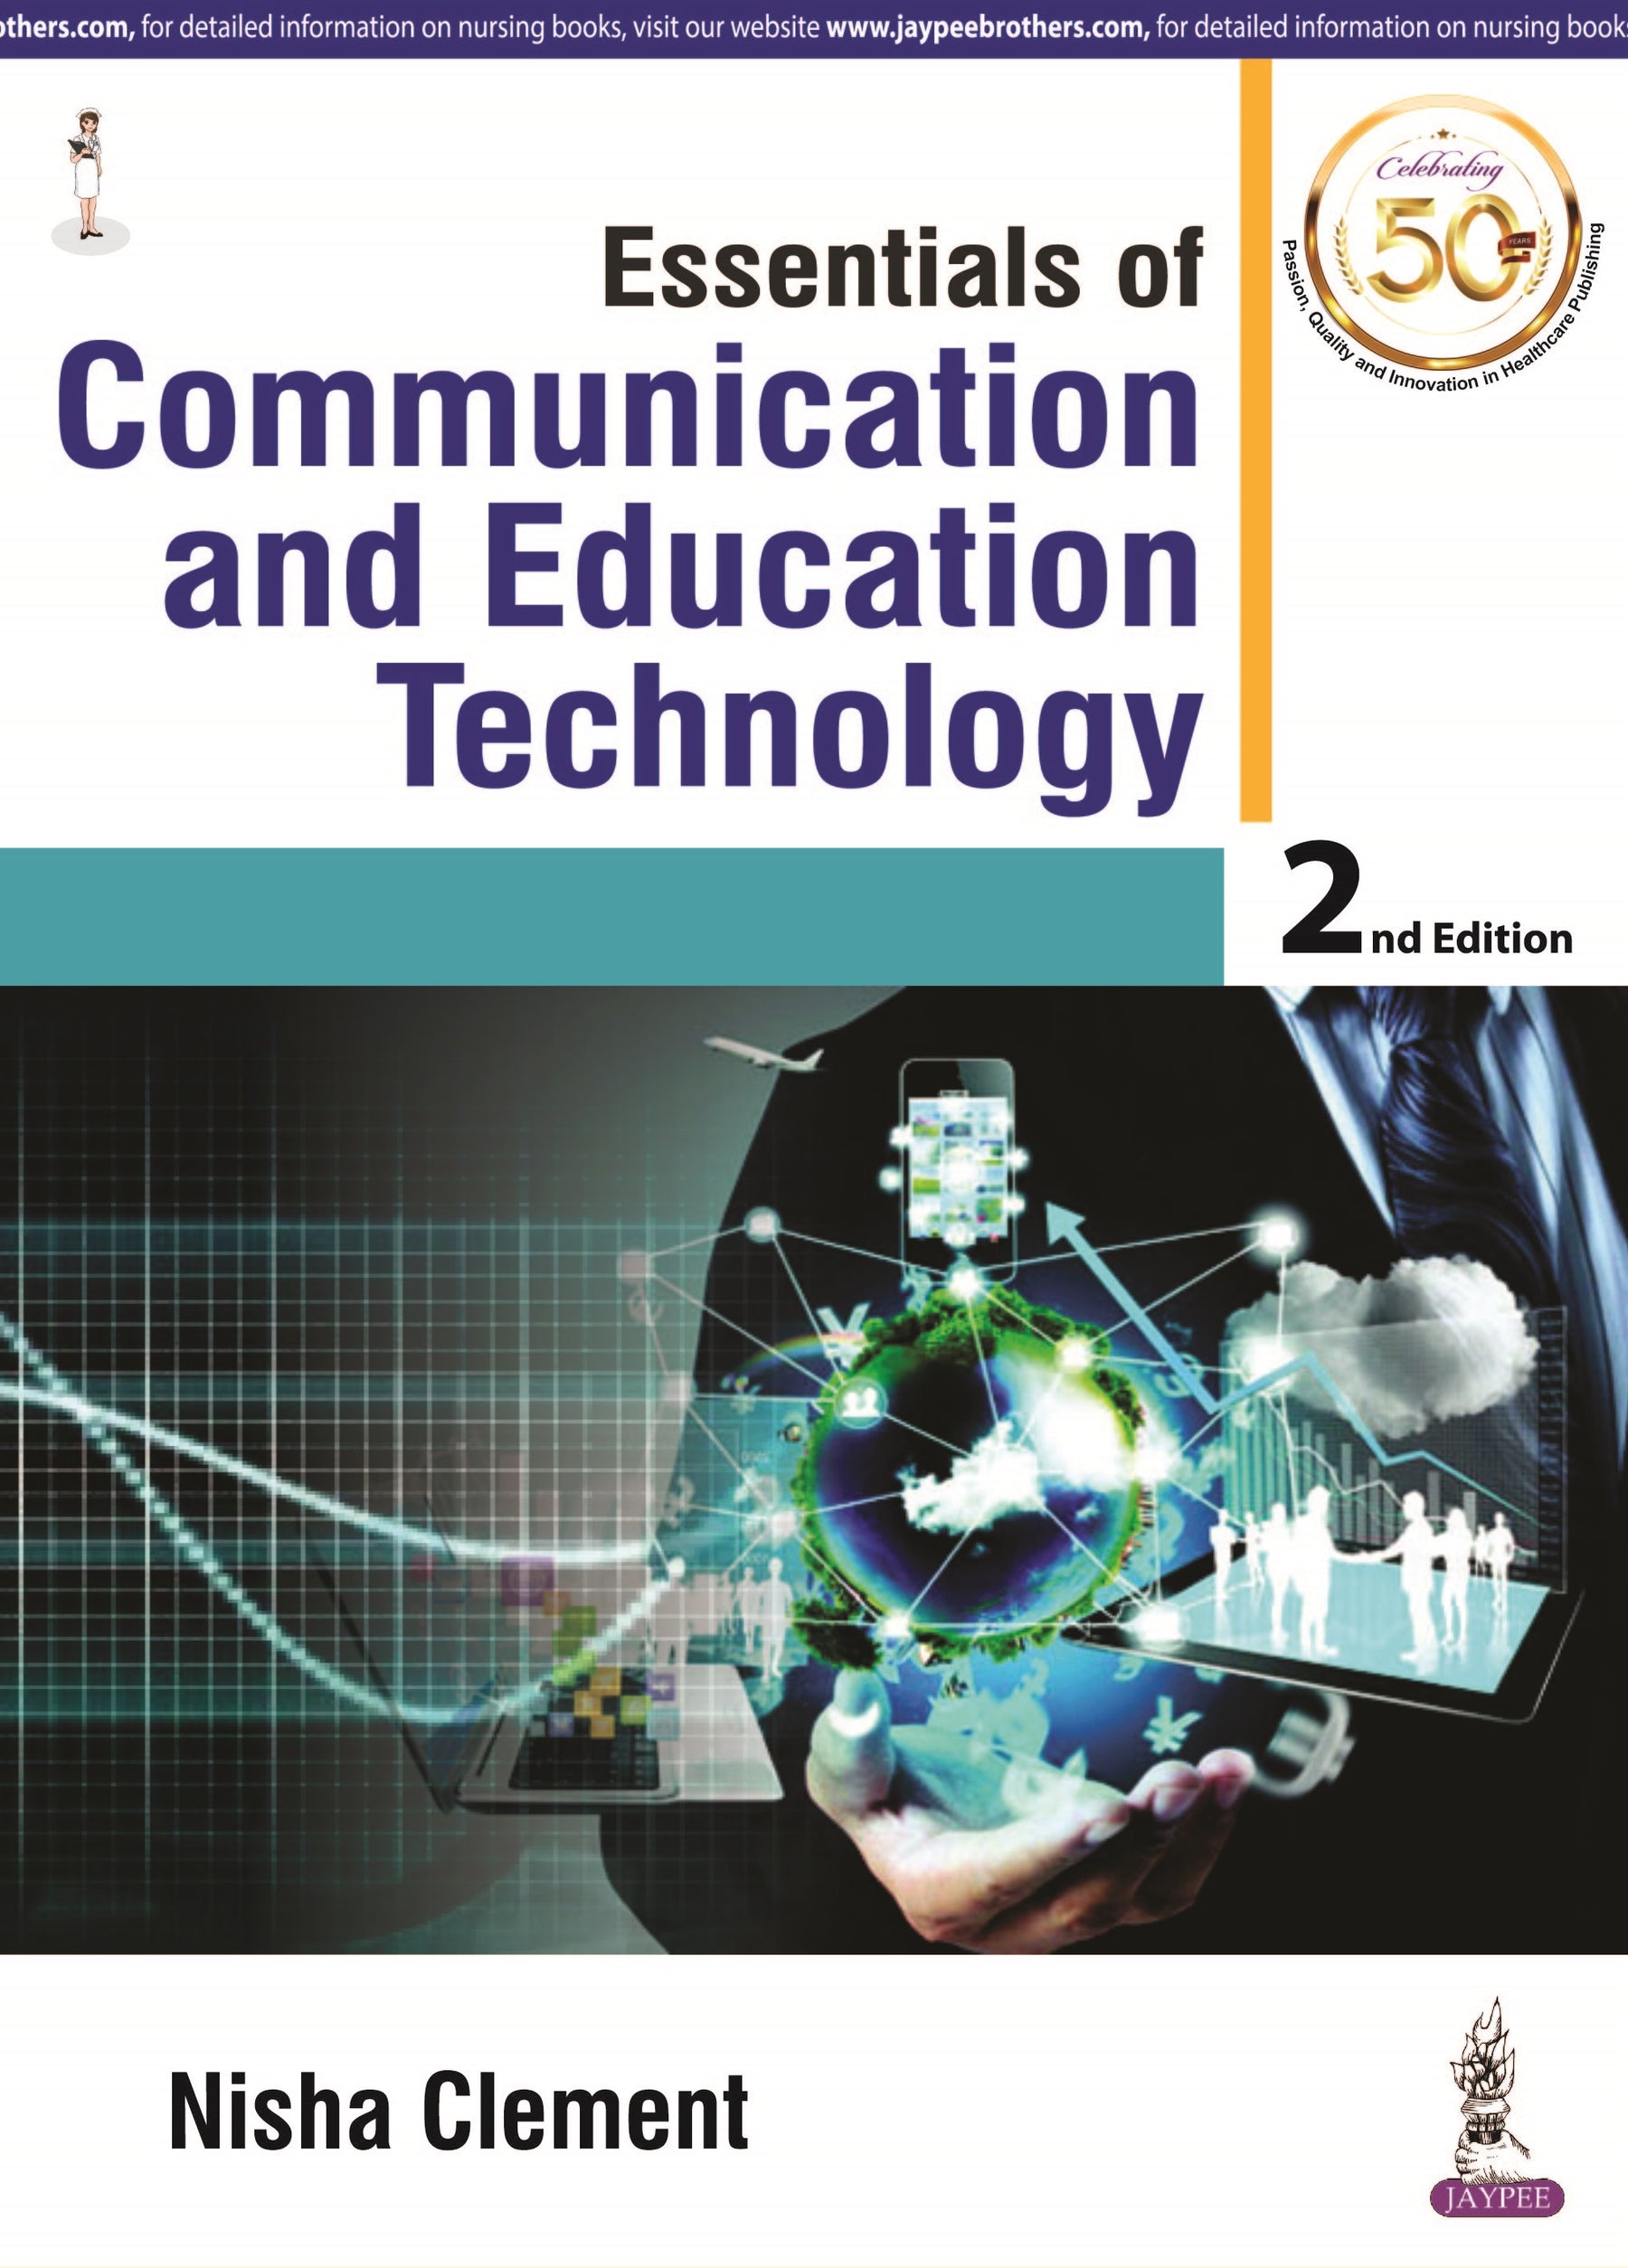 ESSENTIALS OF COMMUNICATION AND EDUCATION TECHNOLOGY,2/E,NISHA CLEMENT